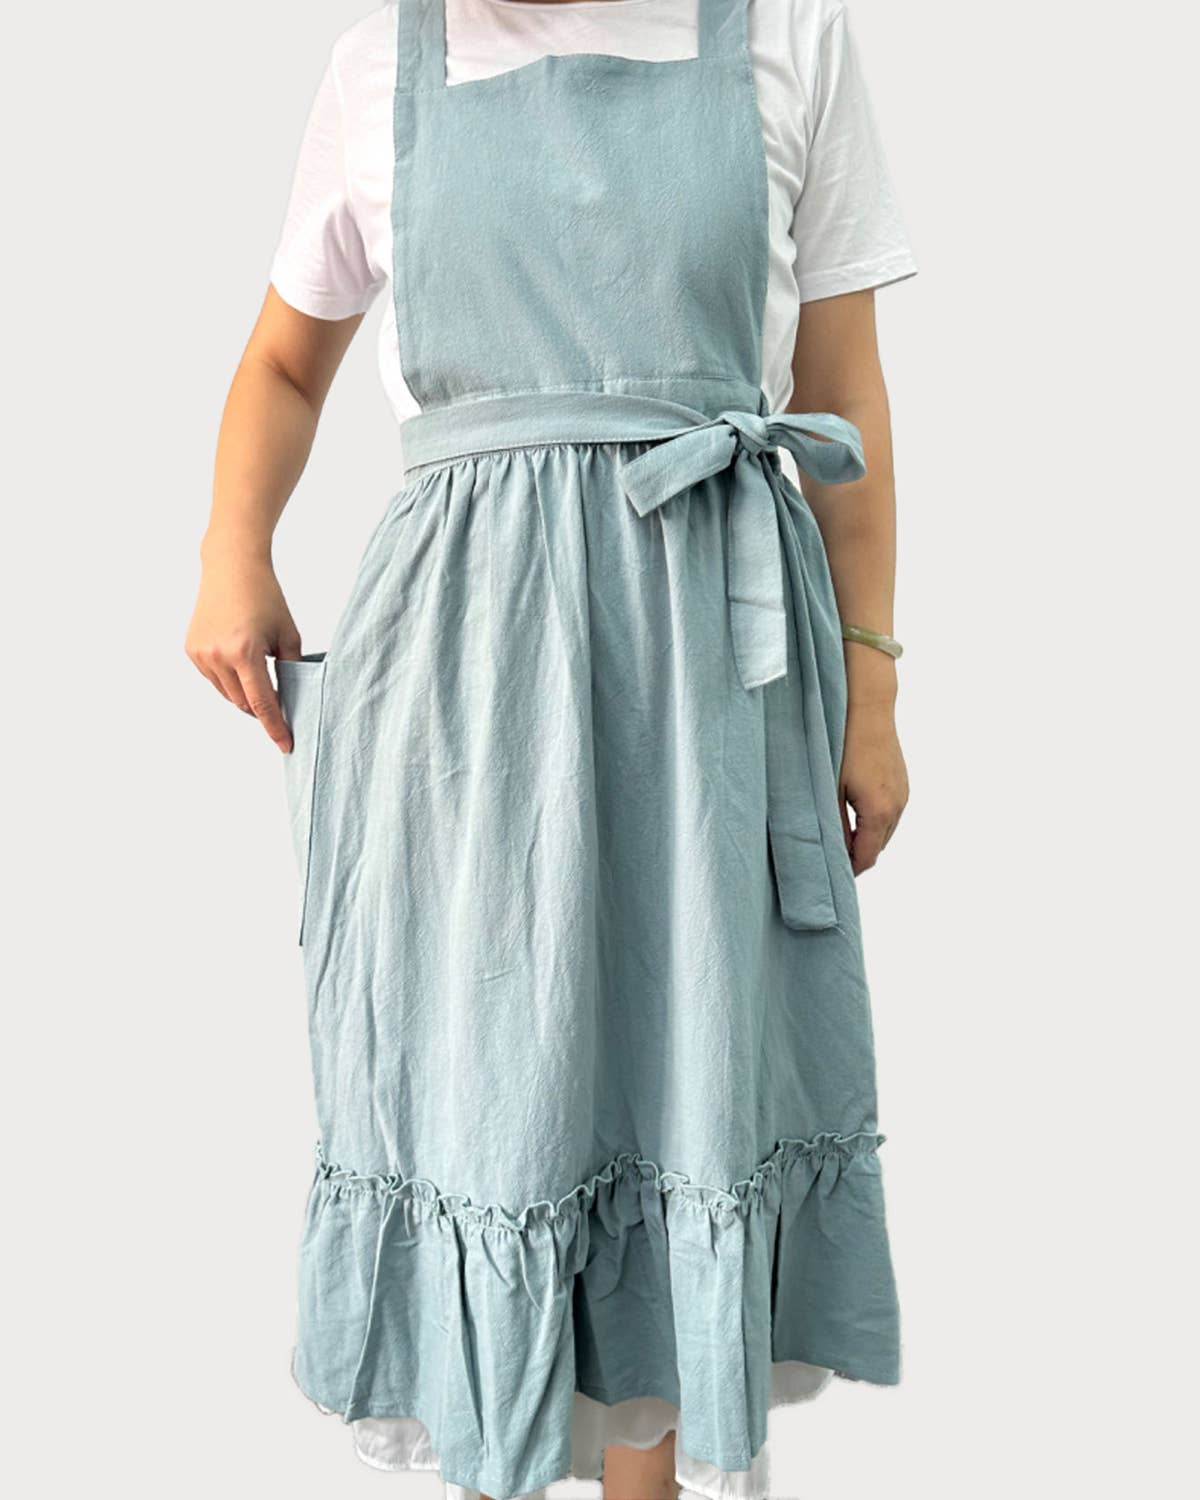 Vintage French Country Style Cotton Apron: Blue-light